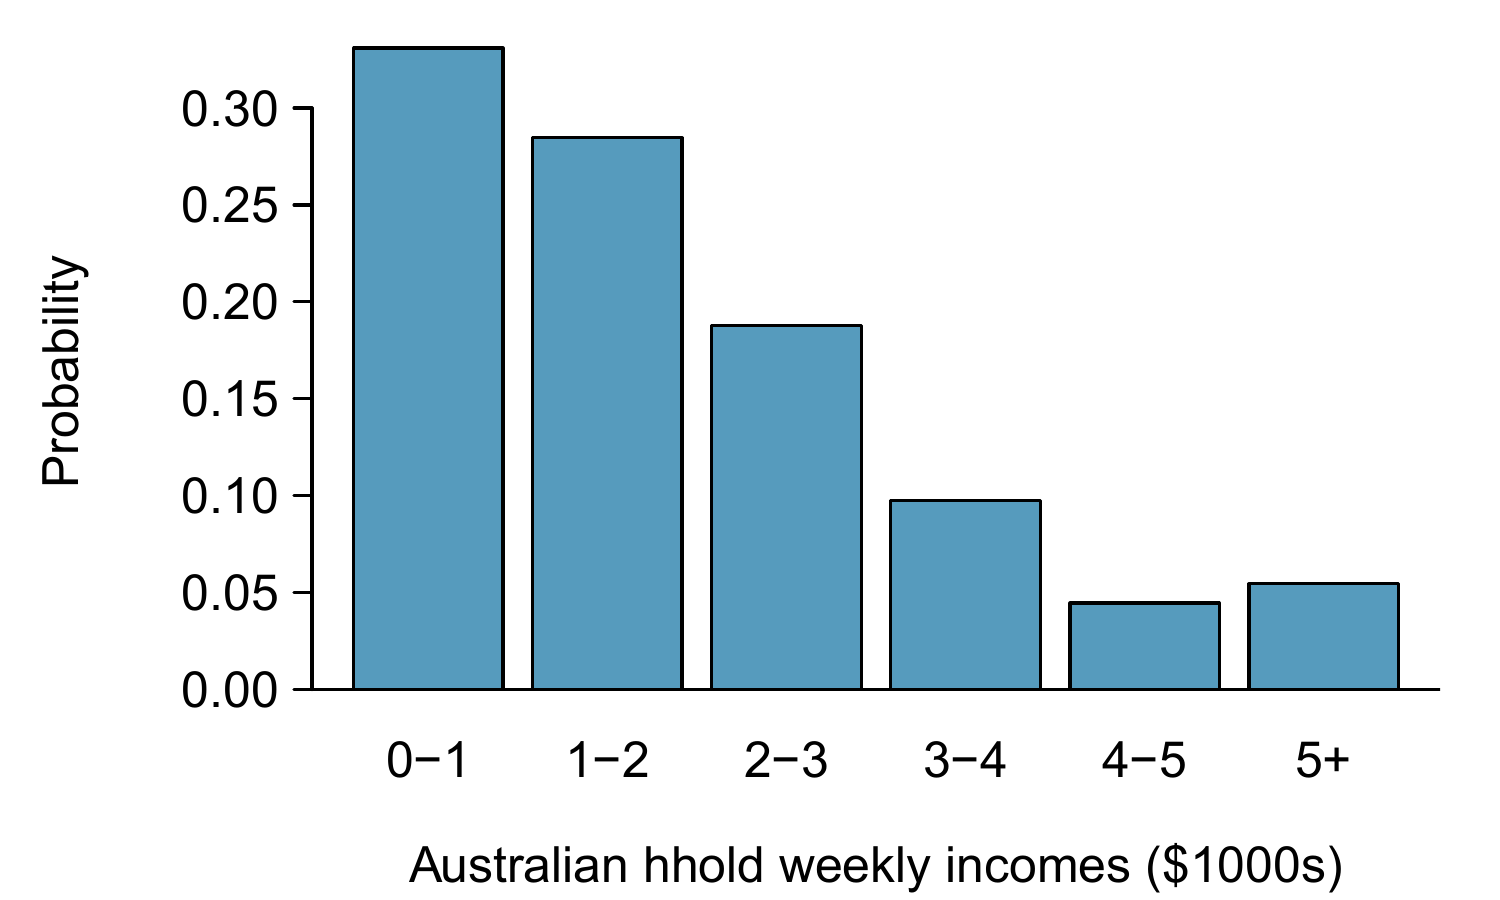 The probability distribution of Australian household income.